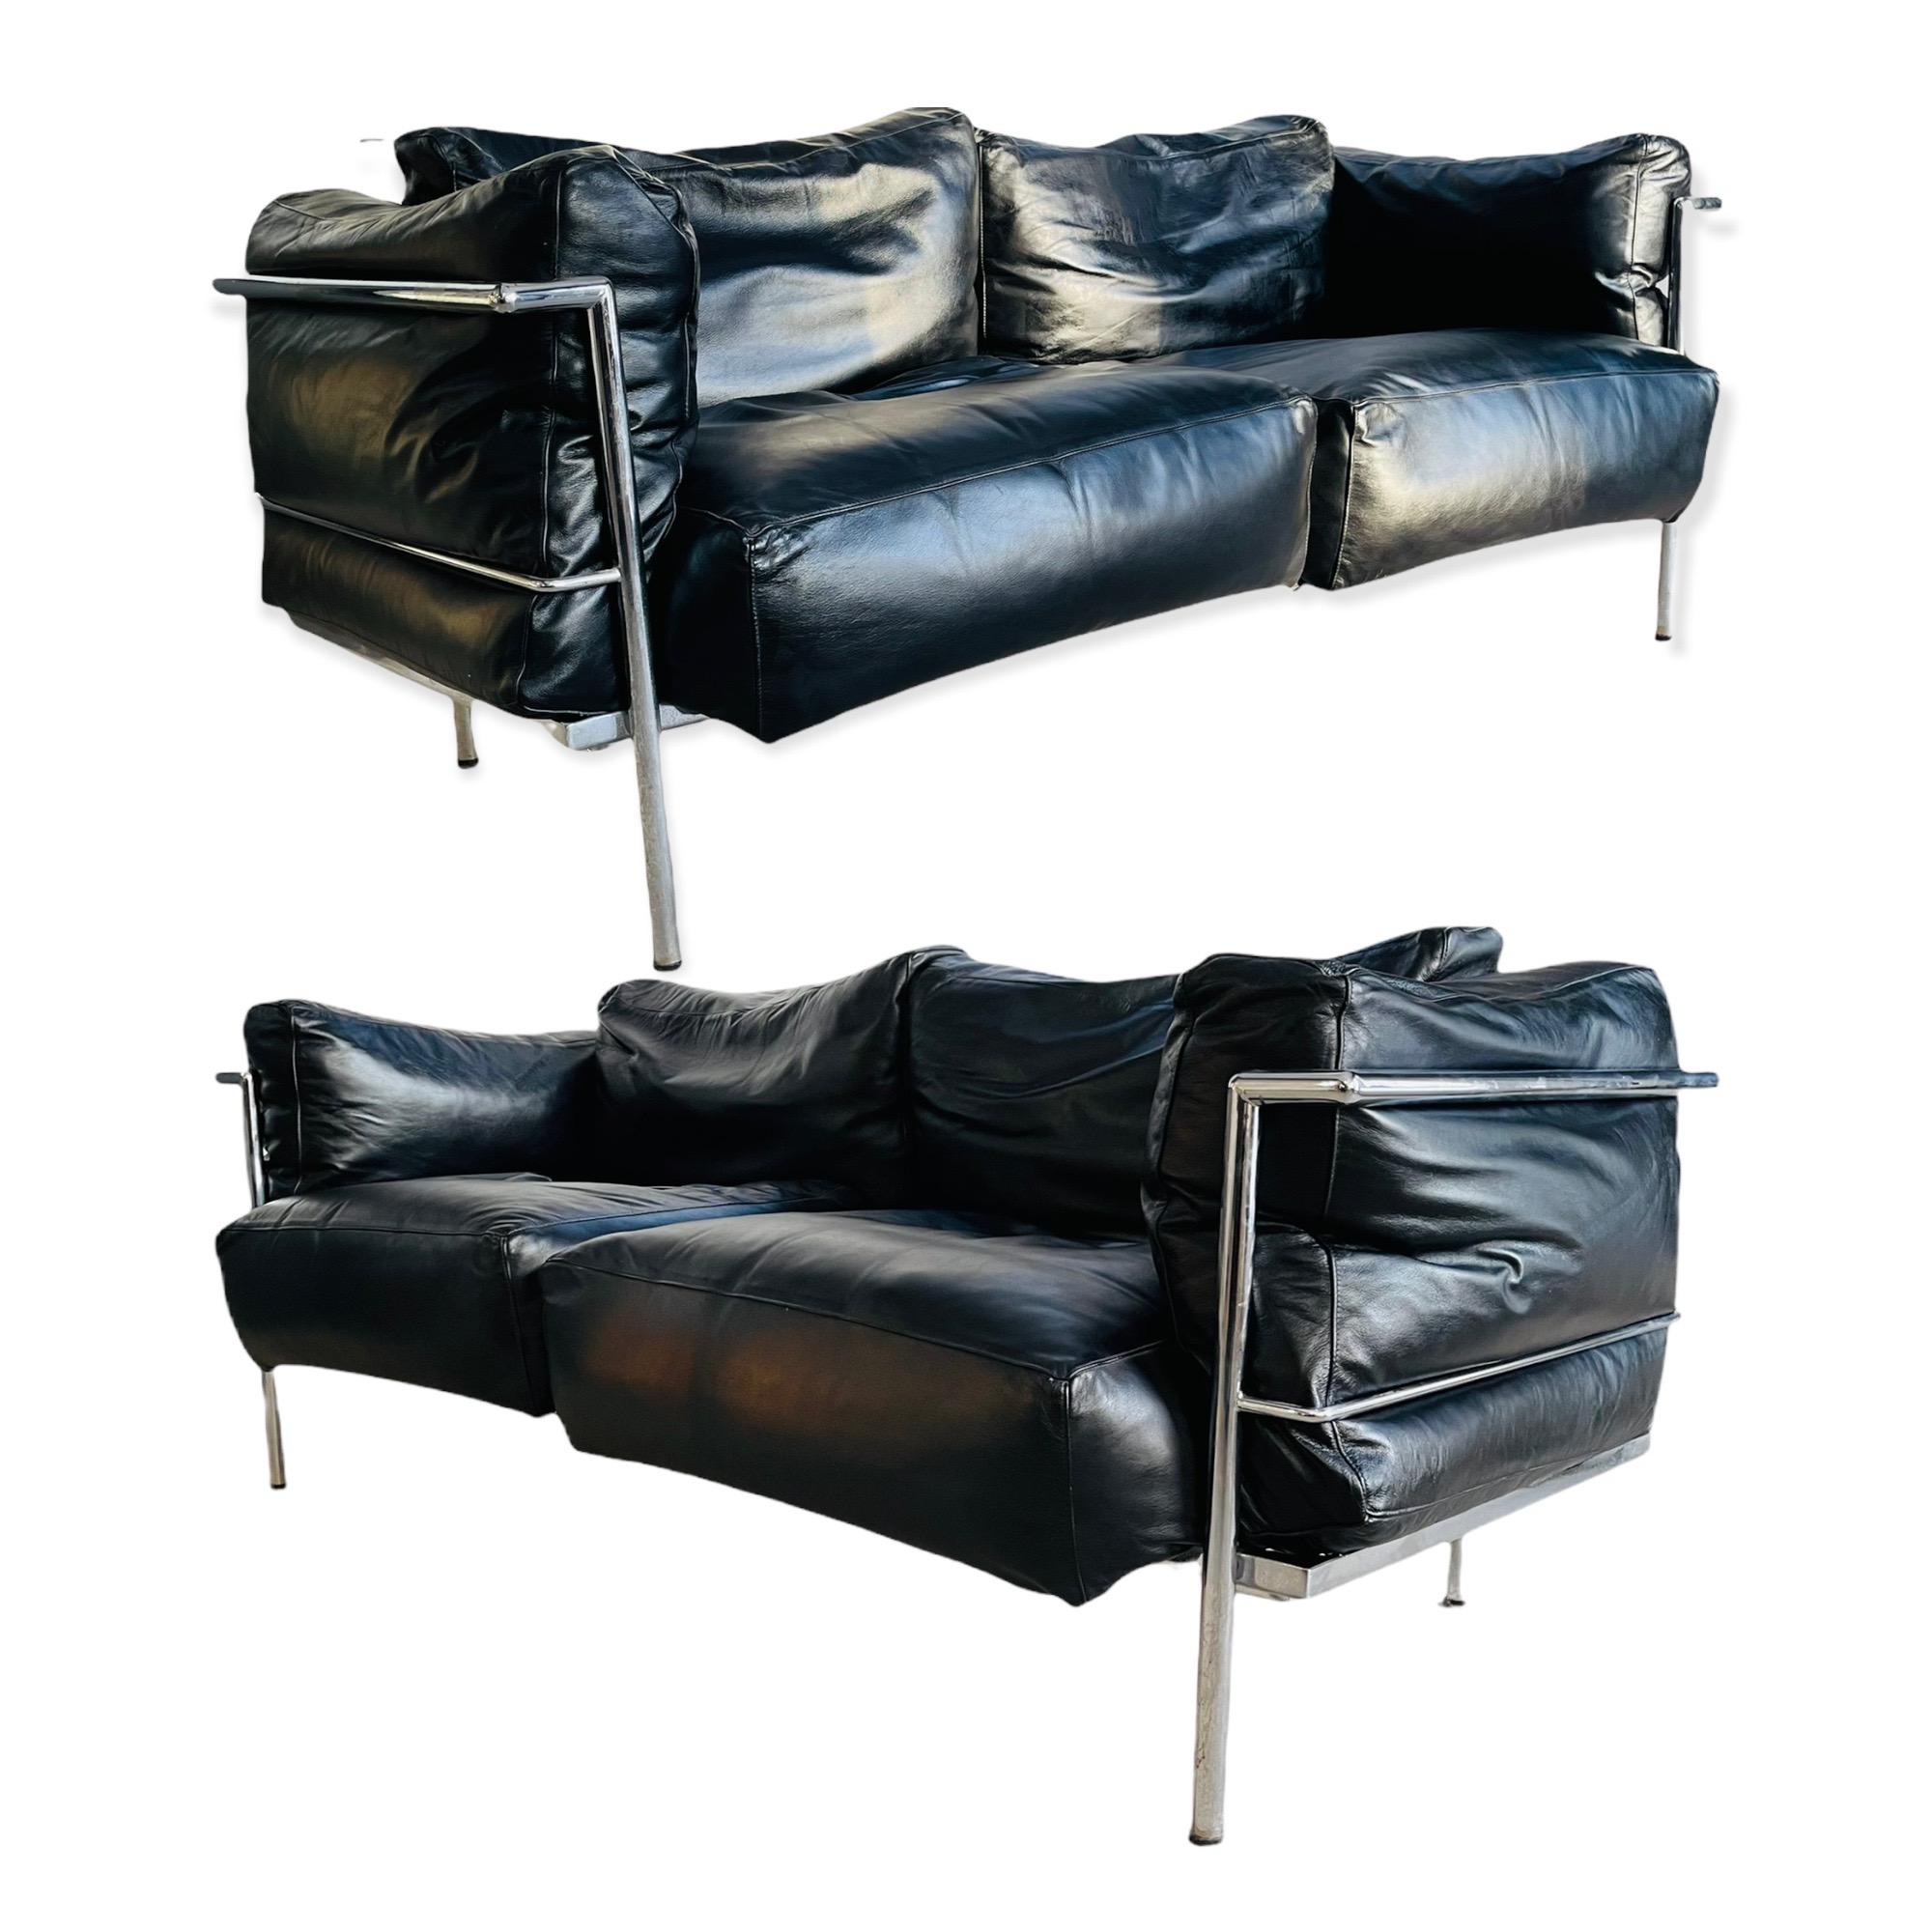 Stunning pair of Le Corbusier model LC2 sofas. The sofas are Italian leather on a tubular chrome frame. Both sofas have been nicely worn in and have an excellent vintage patina. The sofa is marked under “Made In Italy”.

Measures: W 68” x D 28” x